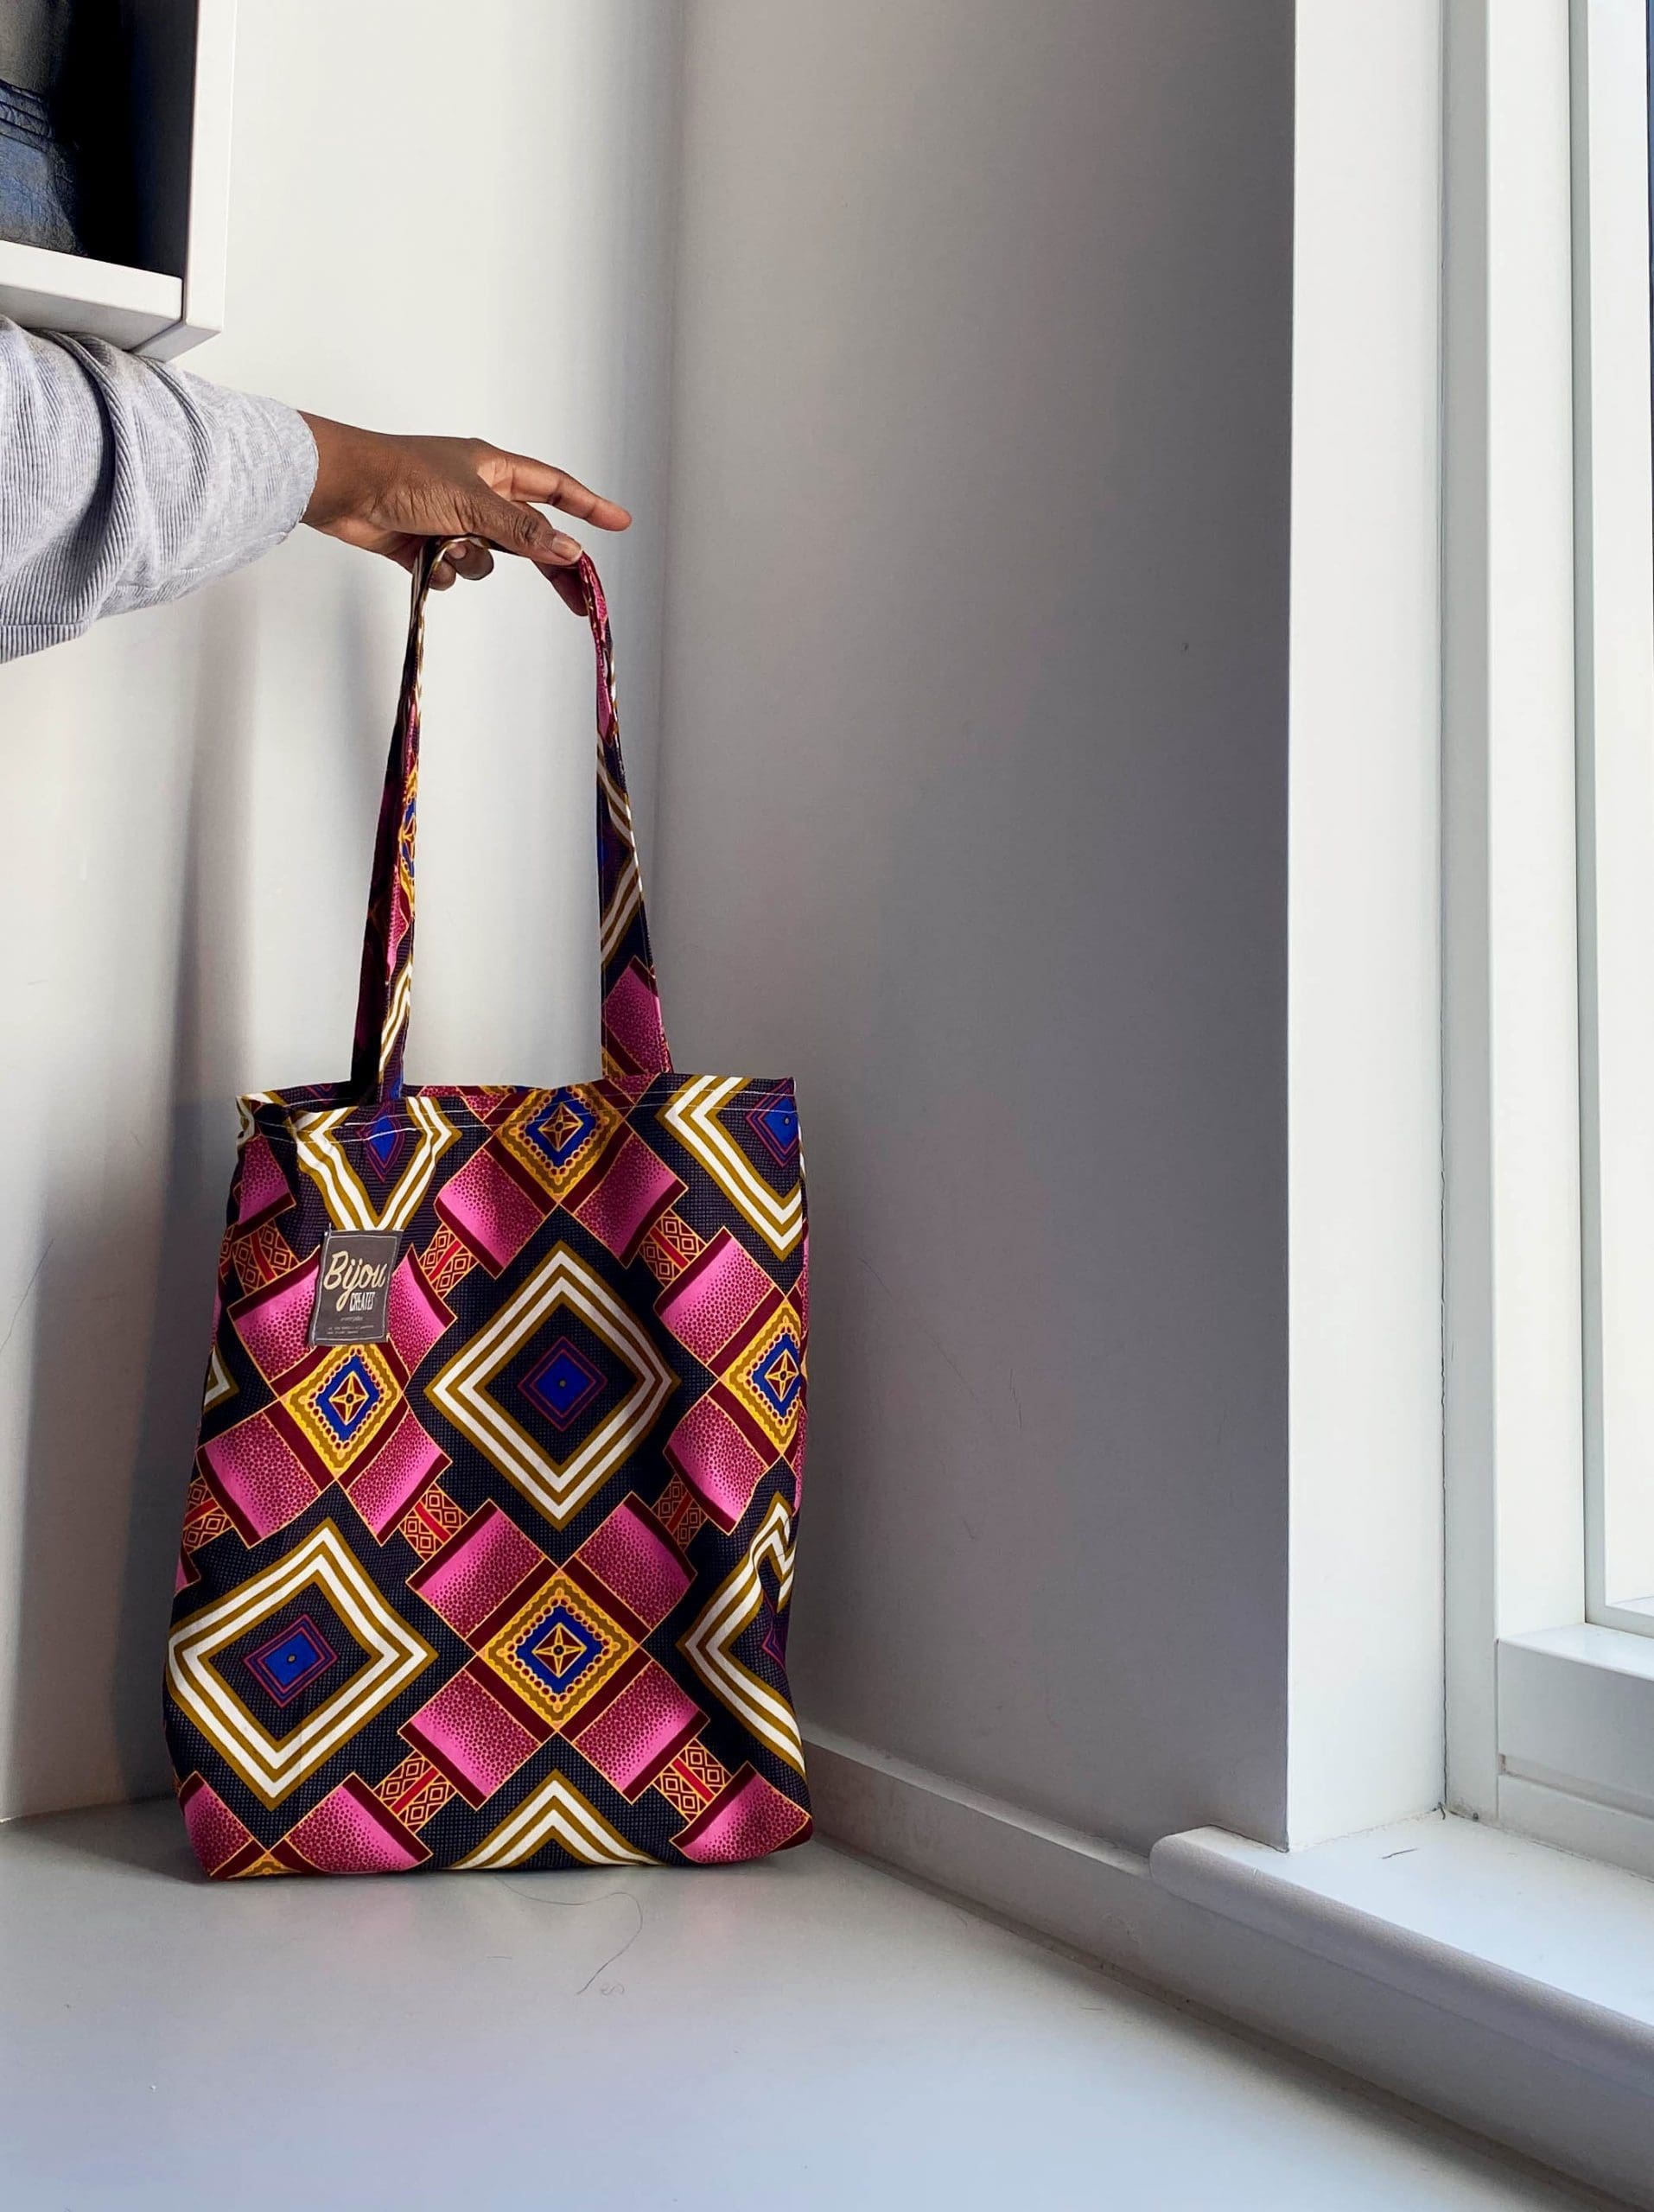 Tote Bag, wakuda, african print fans, black-owned brands, black pound day